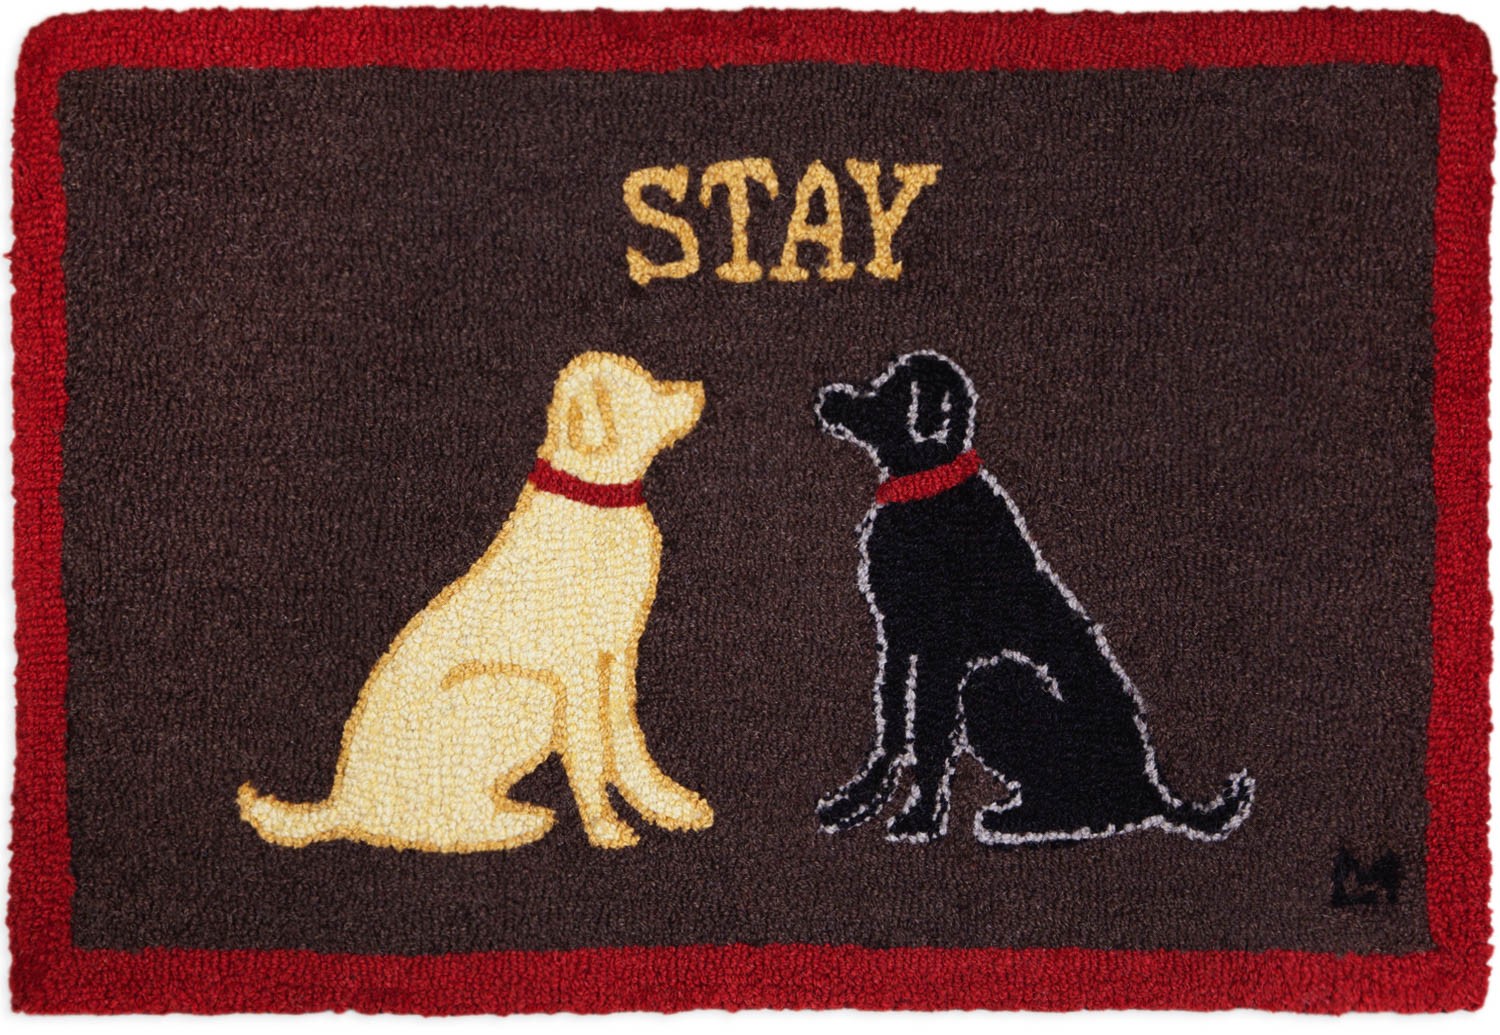 Plow & Hearth Hand-Hooked Wool Dogs Stay Accent Rug